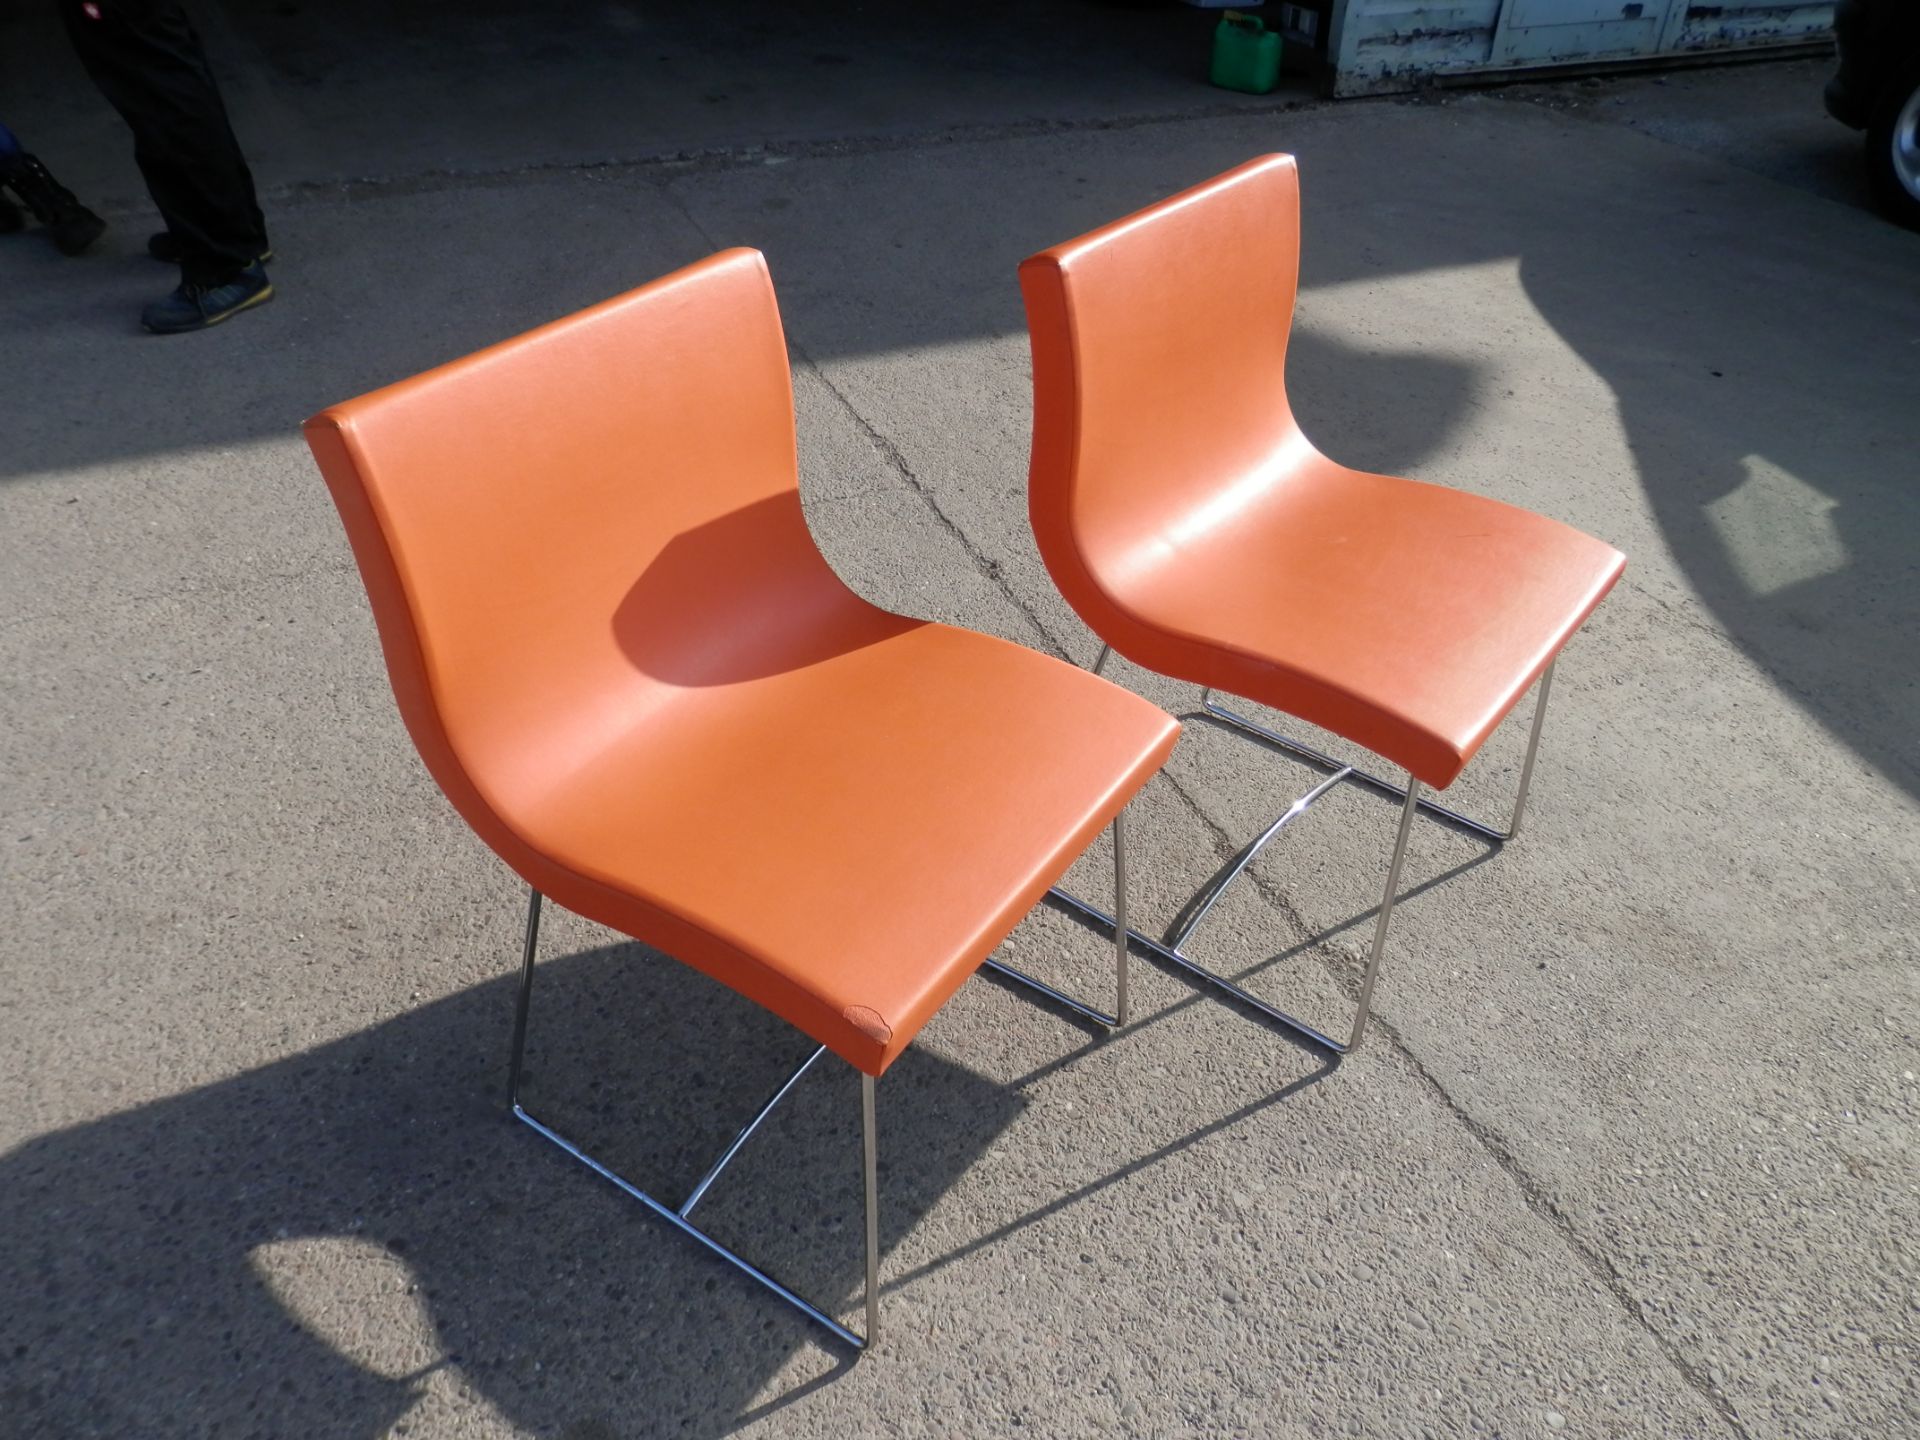 6 X GENUINE ORANGE LINGE ROSET DINING CHAIRS, 1990S? RRP £1800 for 6 !!